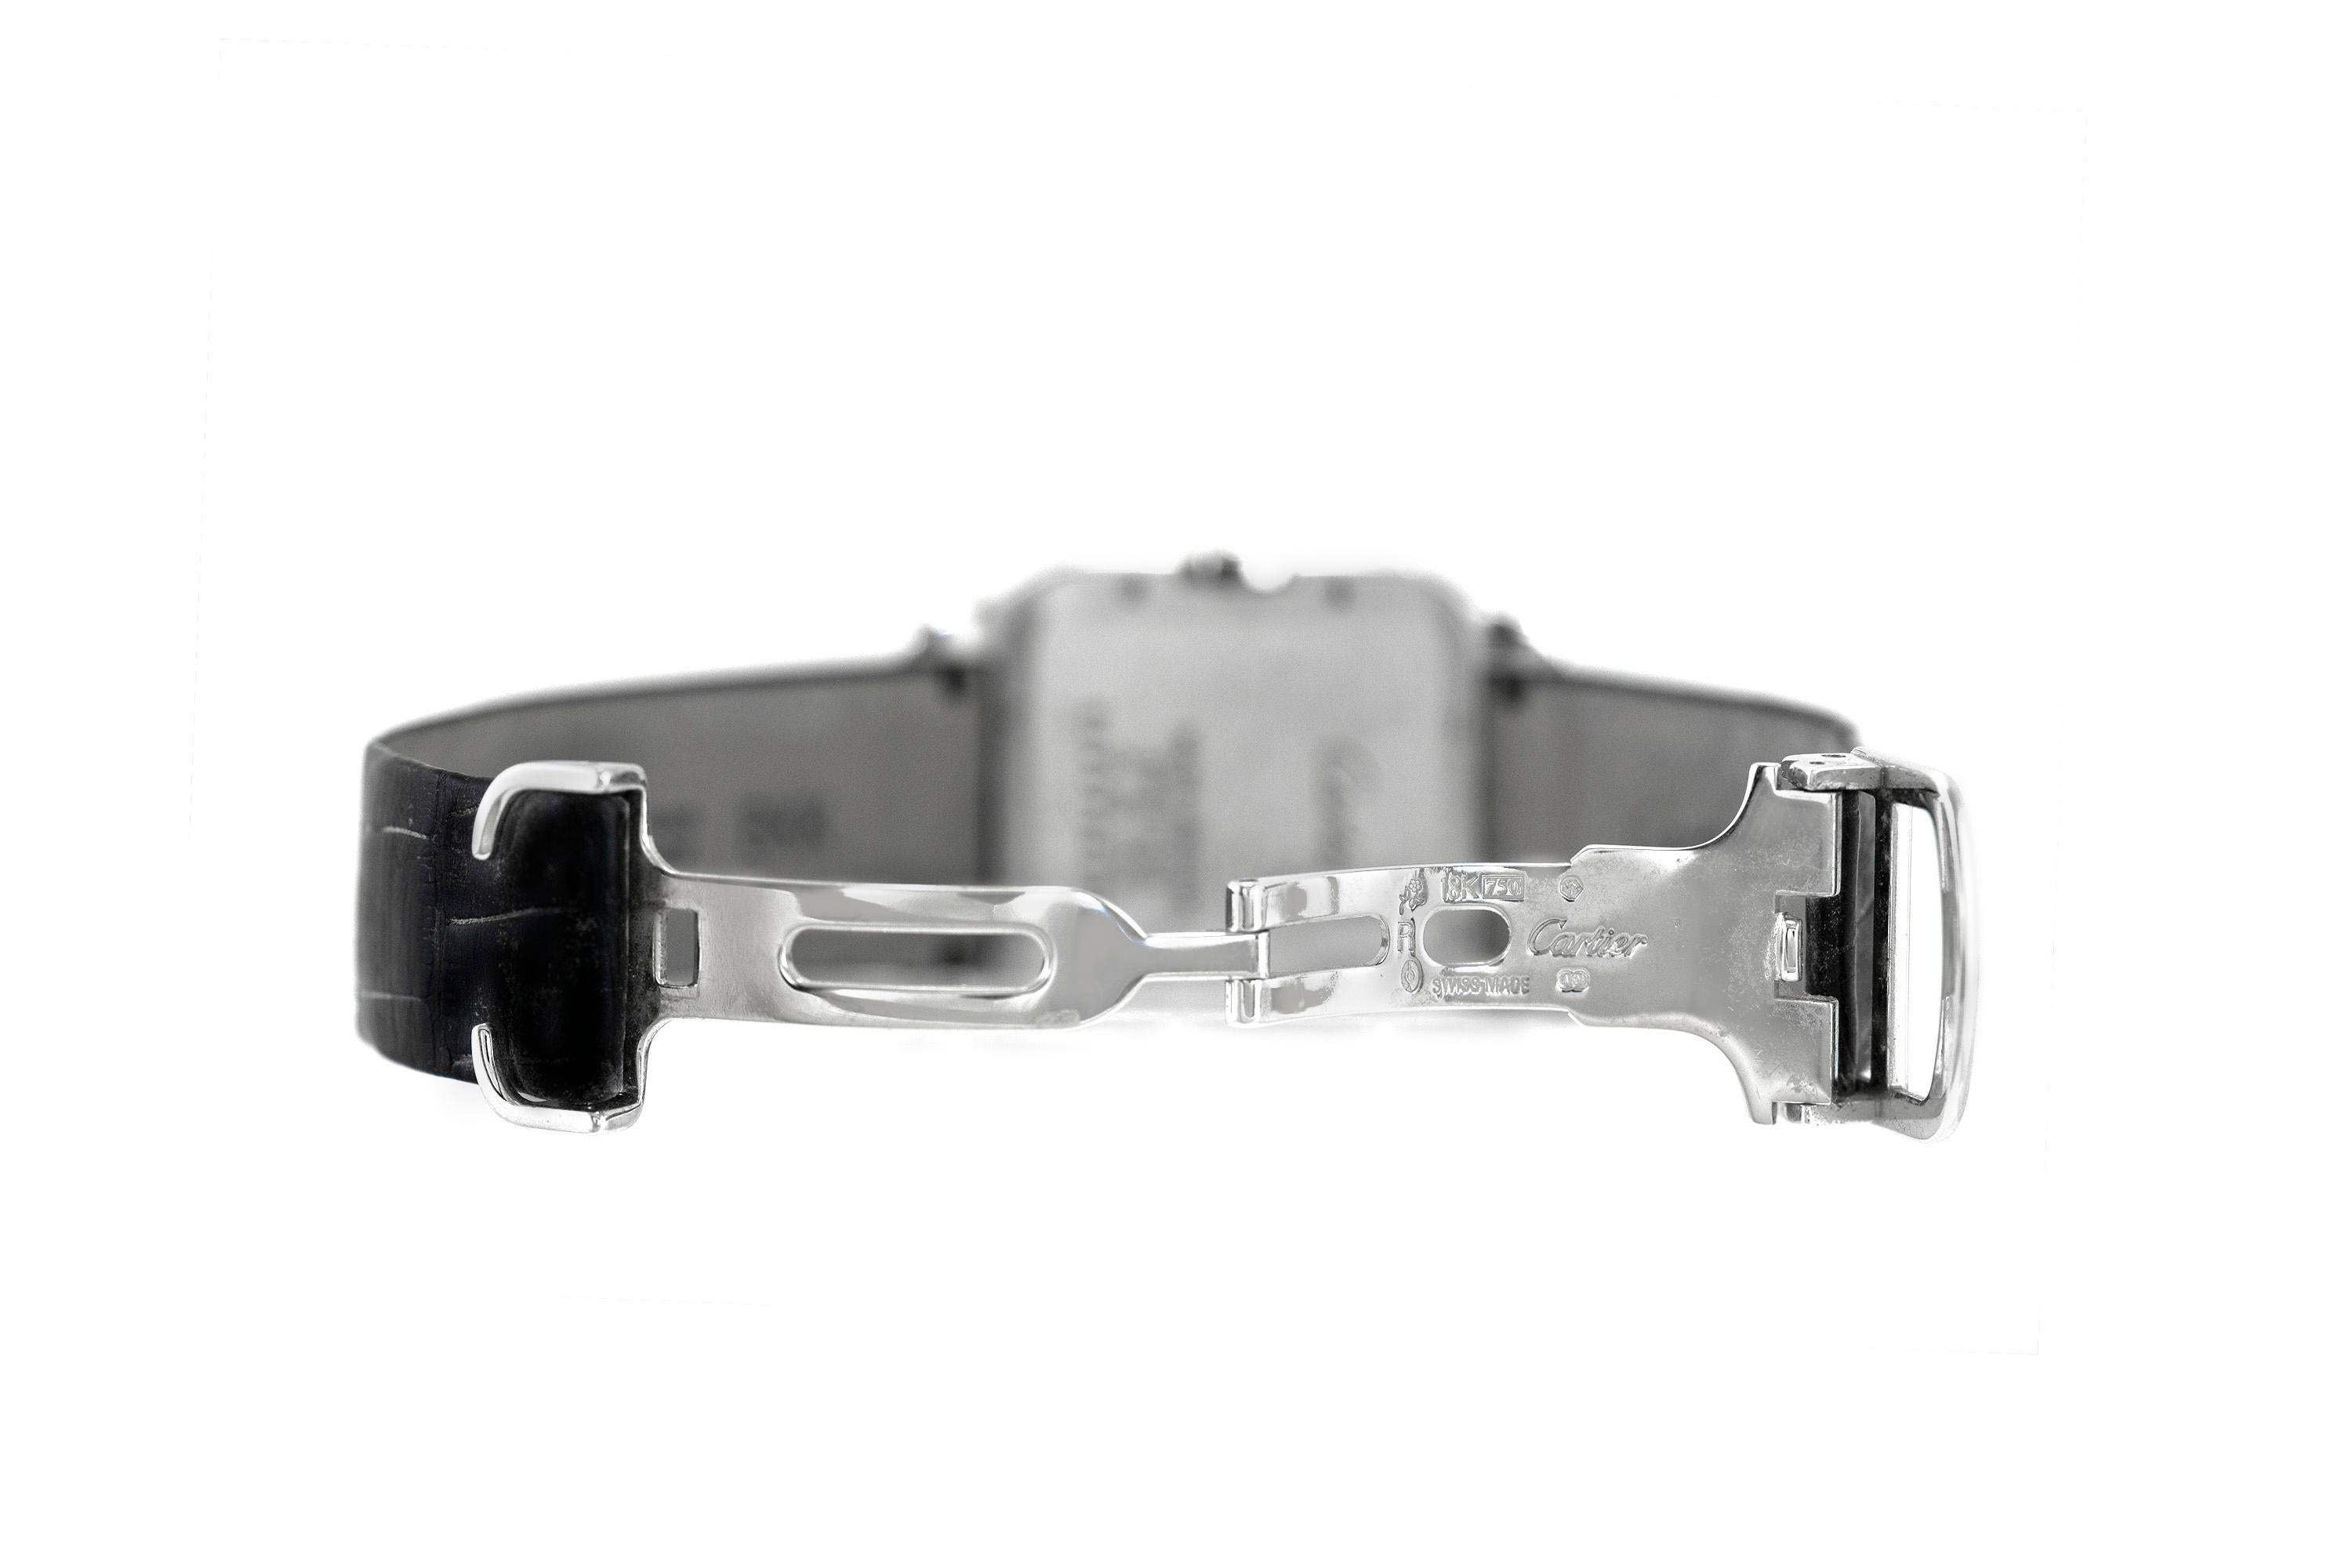 Finely crafted in 18k white gold and diamonds with back leather straps.
Cartier serial number: WH100251
Comes with original box and papers
Ladies size